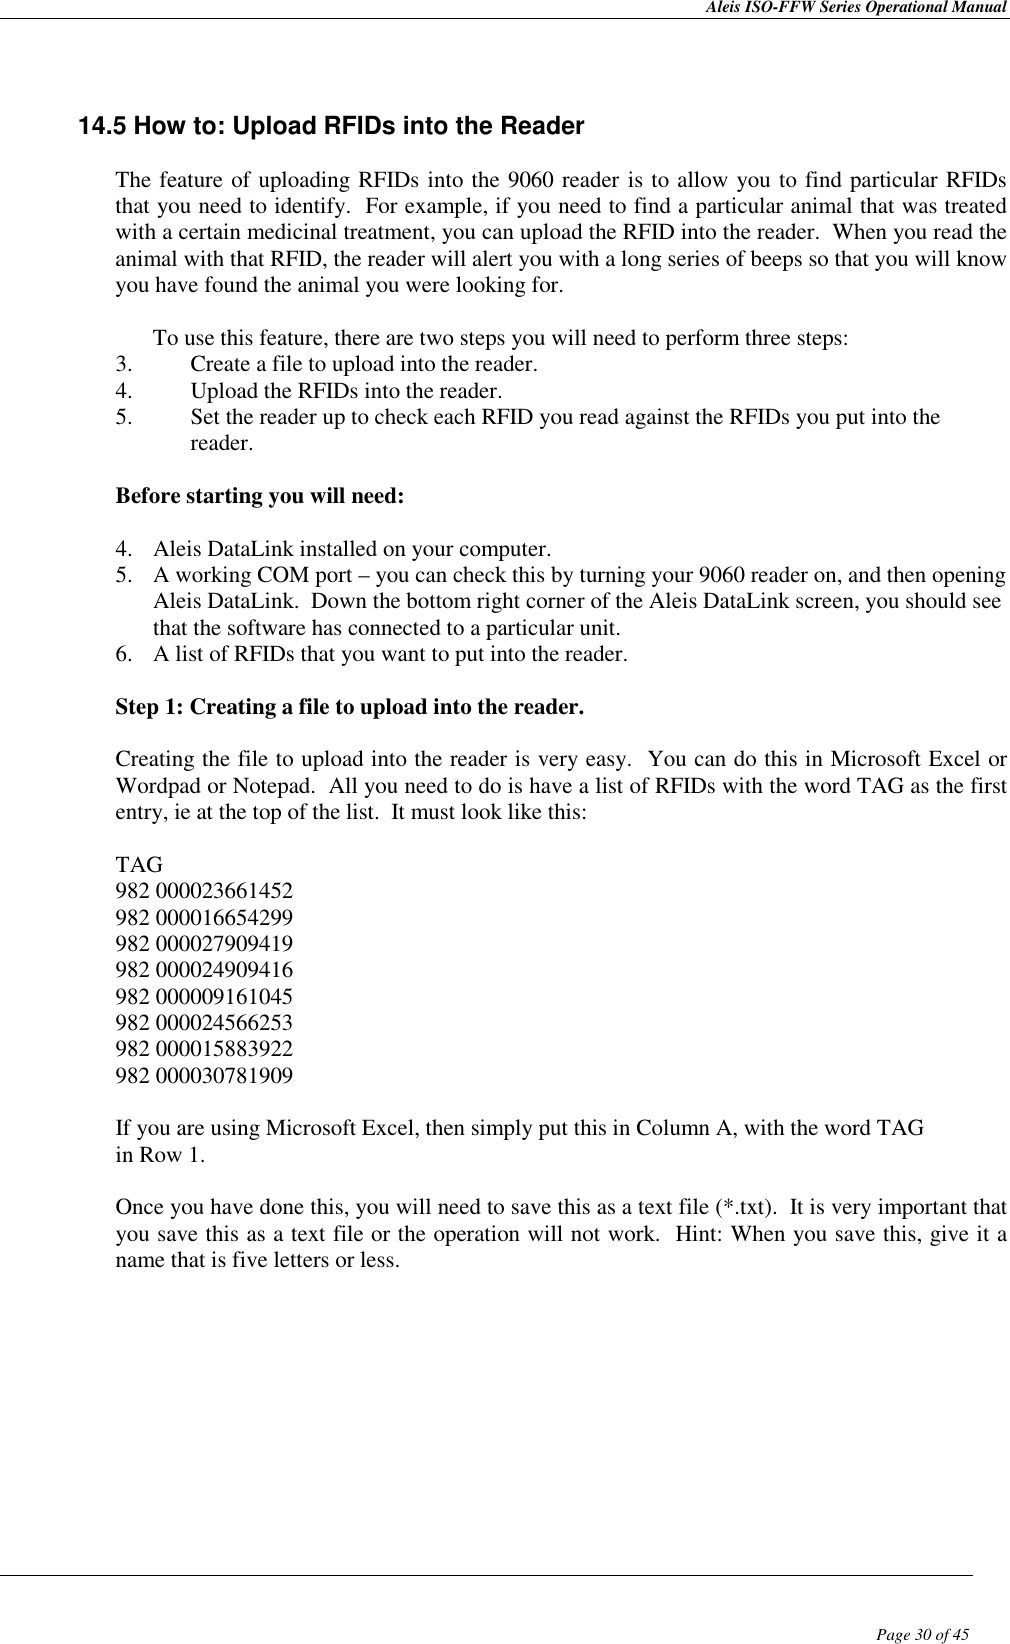 Aleis ISO-FFW Series Operational Manual  Page 30 of 45     14.5 How to: Upload RFIDs into the Reader  The feature of uploading RFIDs into the 9060 reader is to allow you to find particular RFIDs that you need to identify.  For example, if you need to find a particular animal that was treated with a certain medicinal treatment, you can upload the RFID into the reader.  When you read the animal with that RFID, the reader will alert you with a long series of beeps so that you will know you have found the animal you were looking for.  To use this feature, there are two steps you will need to perform three steps: 3. Create a file to upload into the reader. 4. Upload the RFIDs into the reader. 5. Set the reader up to check each RFID you read against the RFIDs you put into the reader.  Before starting you will need:  4. Aleis DataLink installed on your computer. 5. A working COM port – you can check this by turning your 9060 reader on, and then opening Aleis DataLink.  Down the bottom right corner of the Aleis DataLink screen, you should see that the software has connected to a particular unit. 6. A list of RFIDs that you want to put into the reader.  Step 1: Creating a file to upload into the reader.  Creating the file to upload into the reader is very easy.  You can do this in Microsoft Excel or Wordpad or Notepad.  All you need to do is have a list of RFIDs with the word TAG as the first entry, ie at the top of the list.  It must look like this:  TAG 982 000023661452 982 000016654299 982 000027909419 982 000024909416 982 000009161045 982 000024566253 982 000015883922 982 000030781909  If you are using Microsoft Excel, then simply put this in Column A, with the word TAG in Row 1.  Once you have done this, you will need to save this as a text file (*.txt).  It is very important that you save this as a text file or the operation will not work.  Hint: When you save this, give it a name that is five letters or less.            